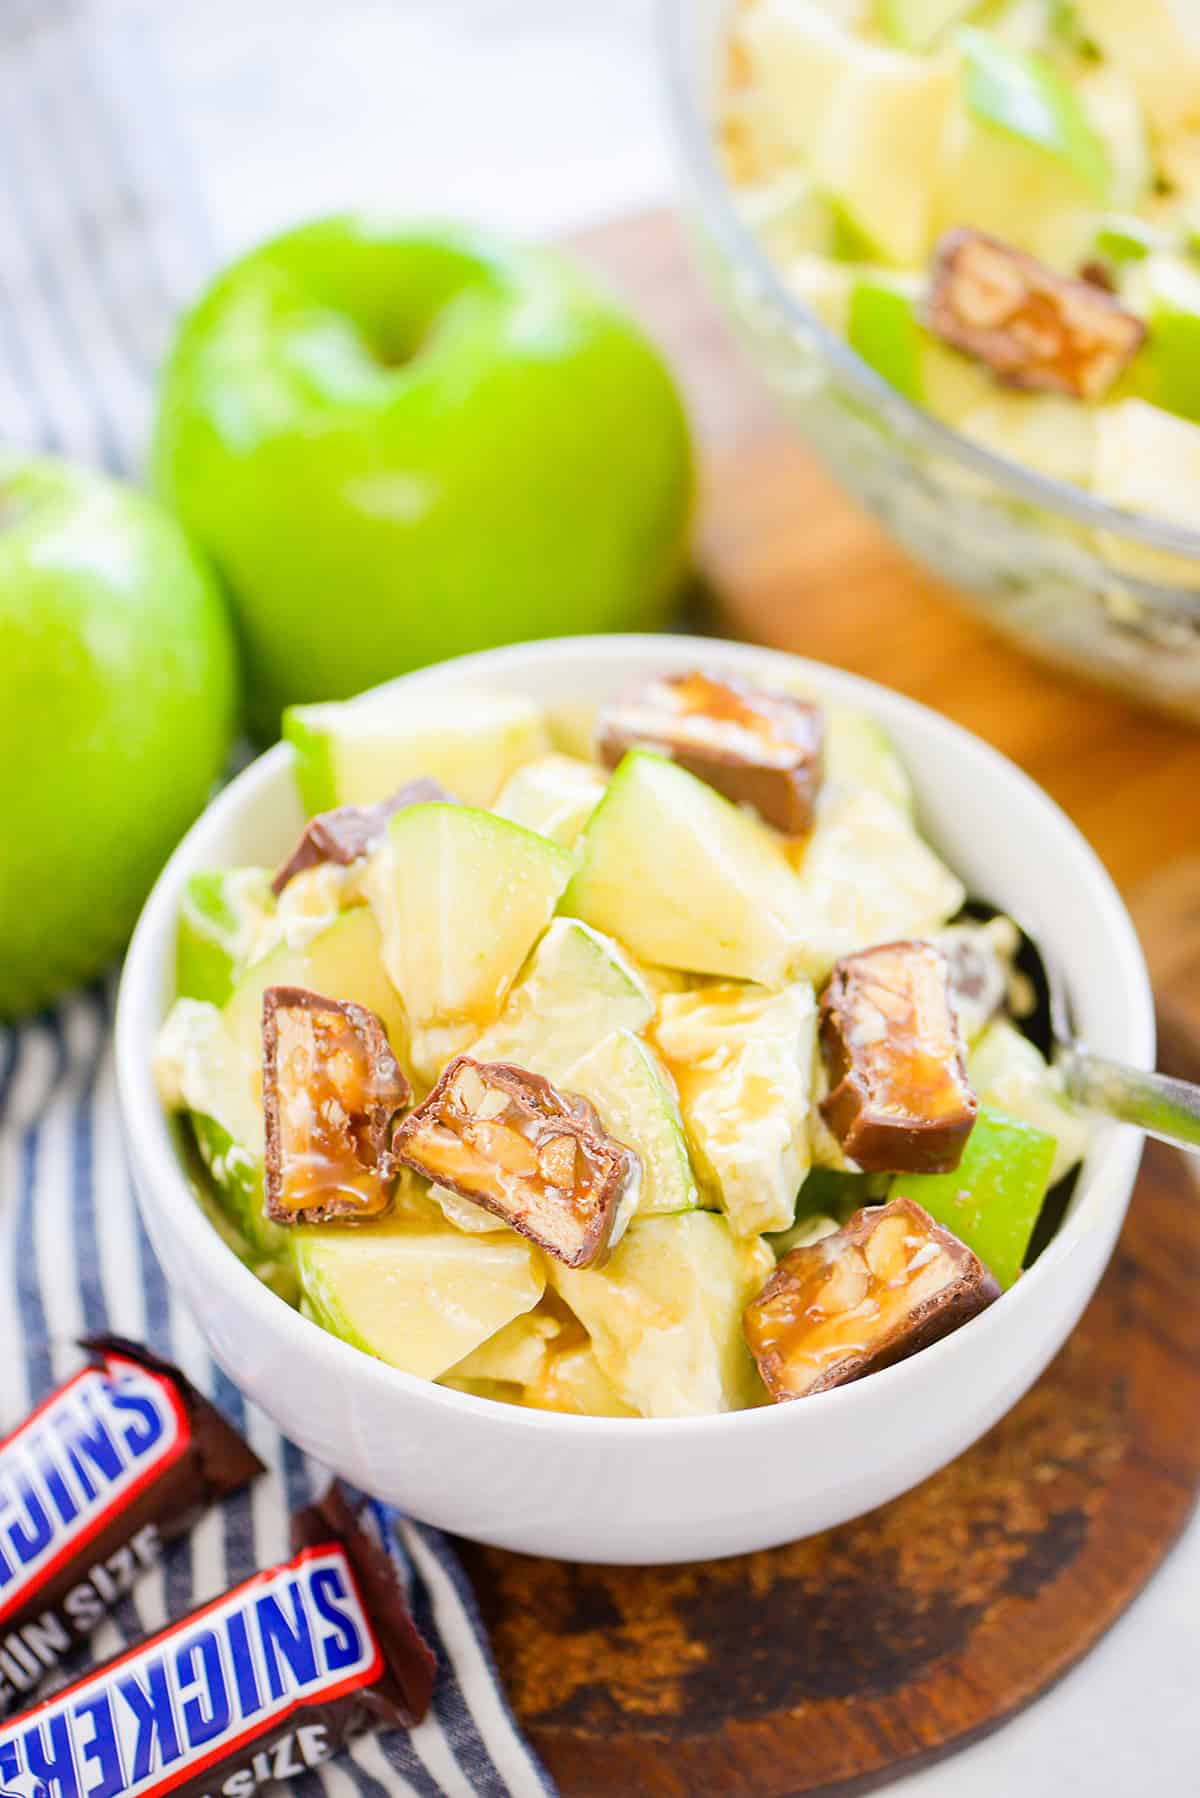 Snickers apple salad in small white bowl.